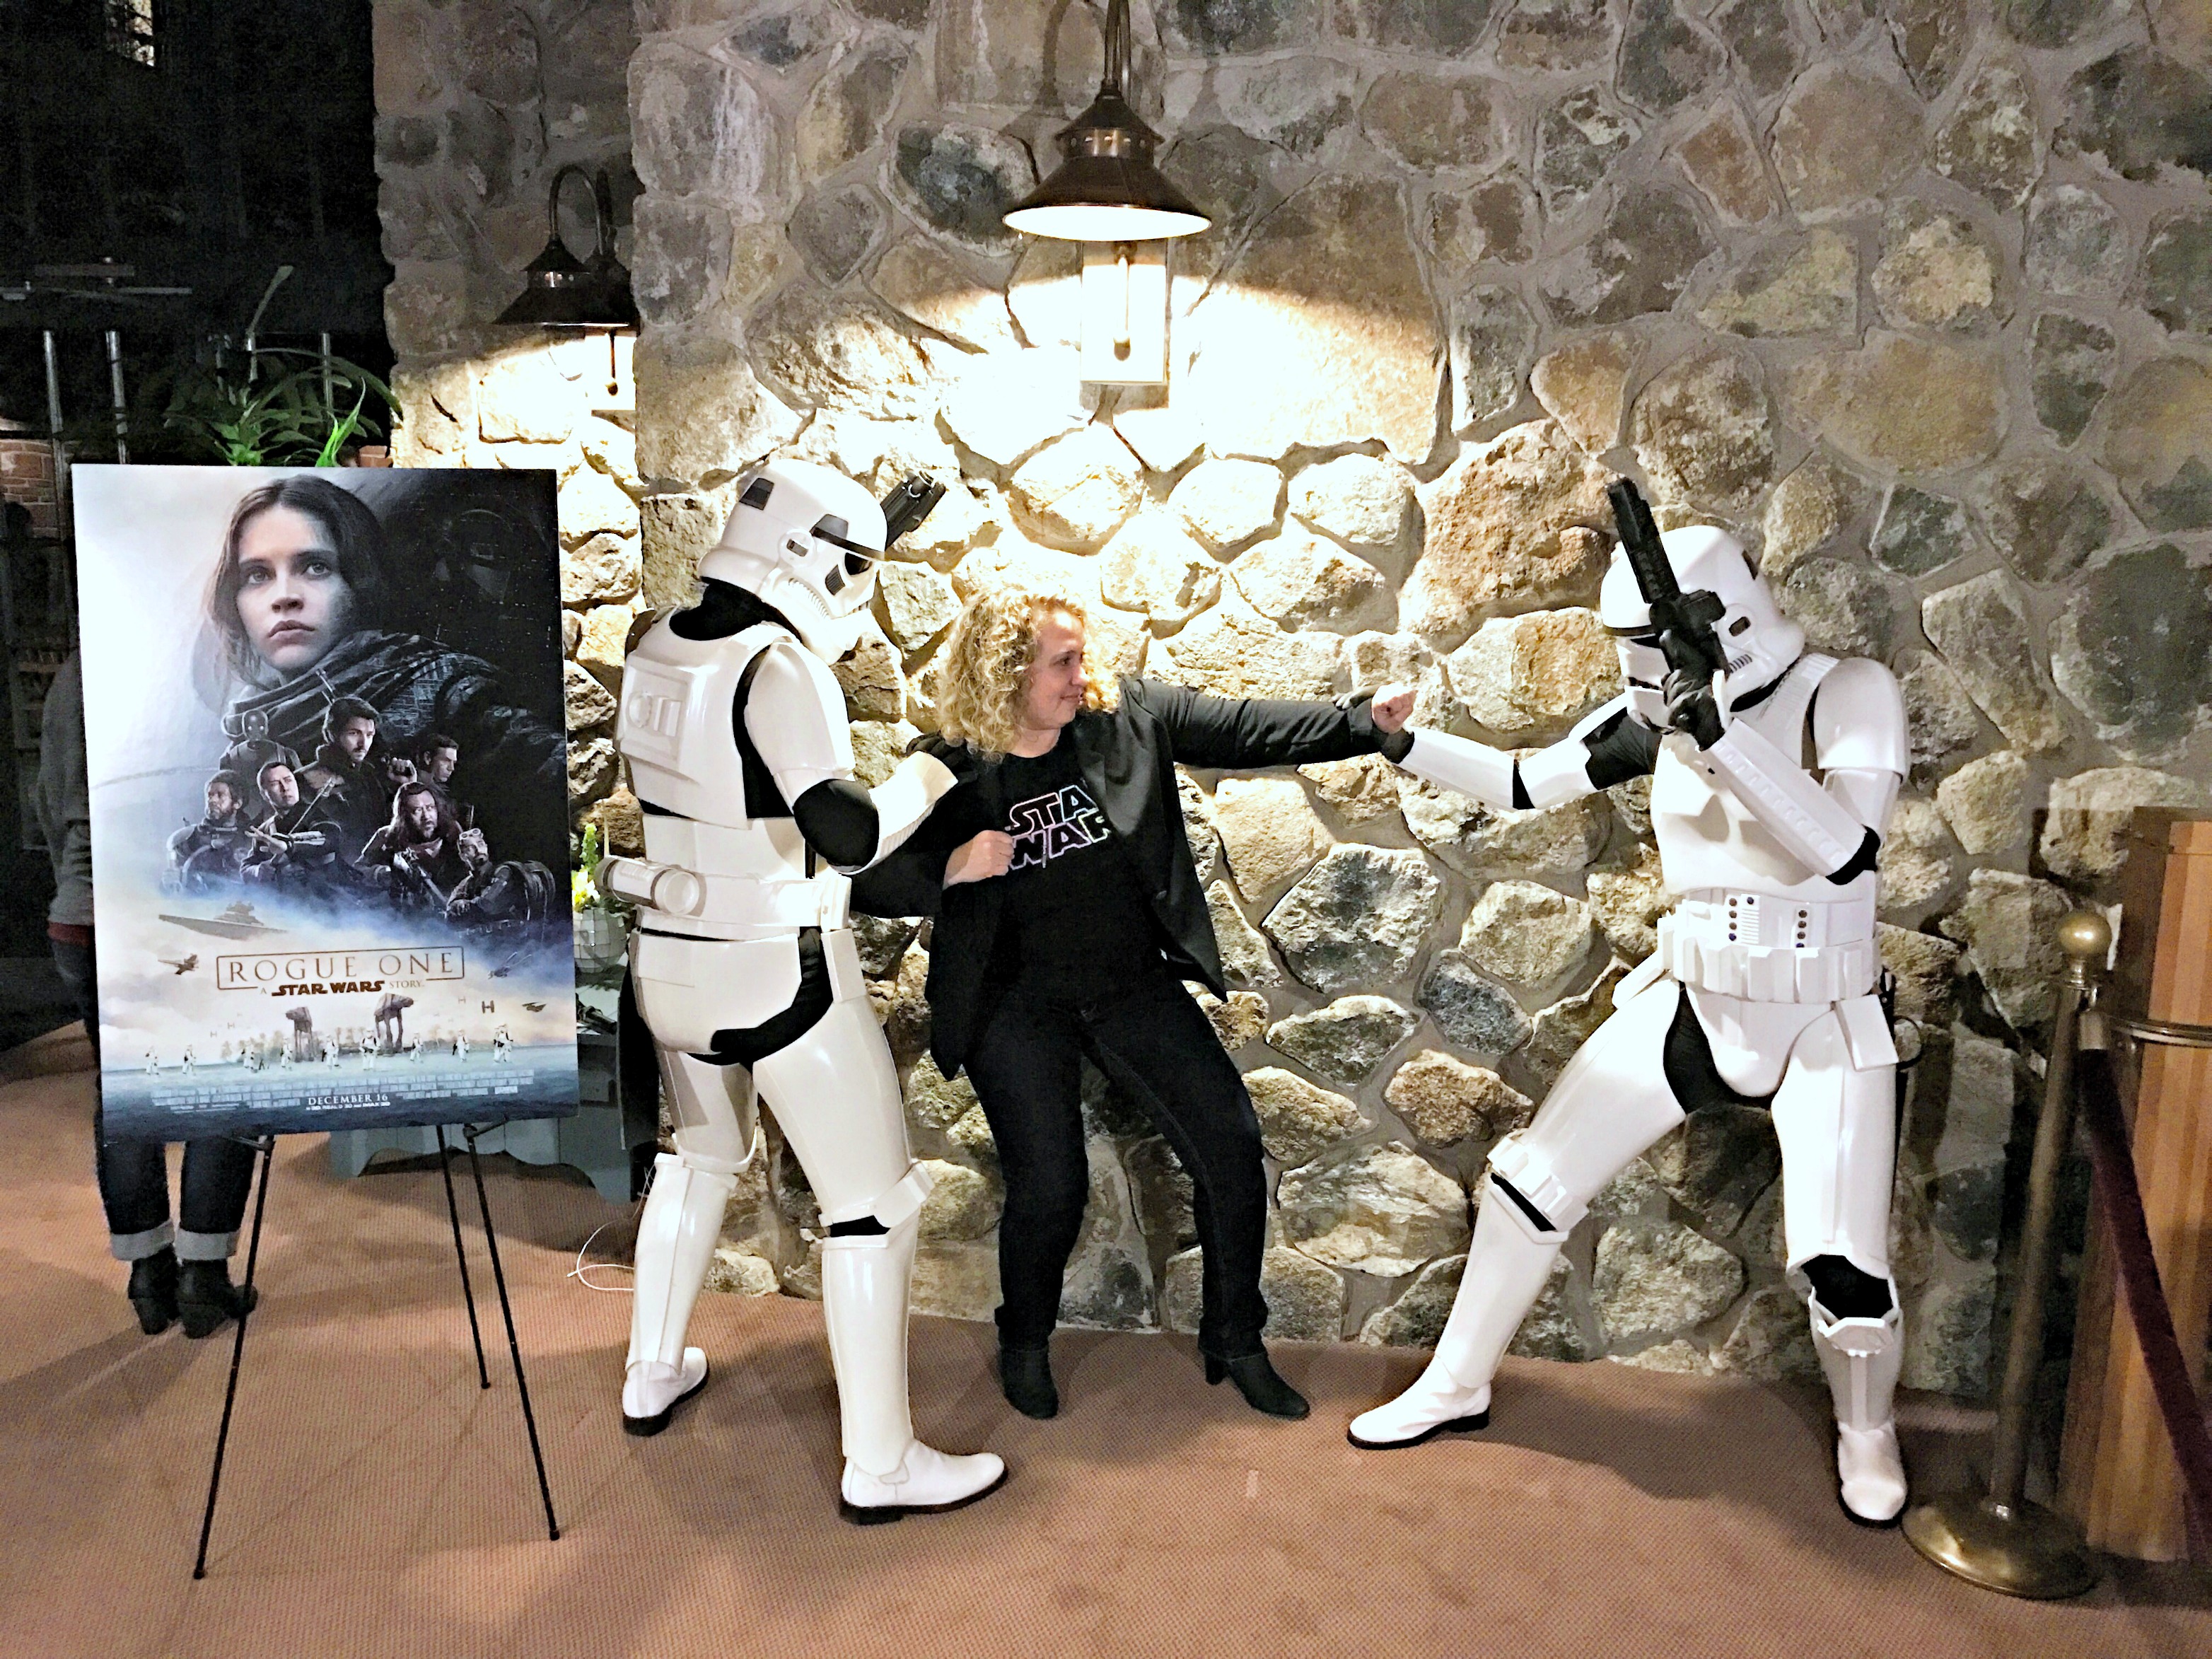 Rogue One Event at Skywalker Ranch and LucasFilm HQ